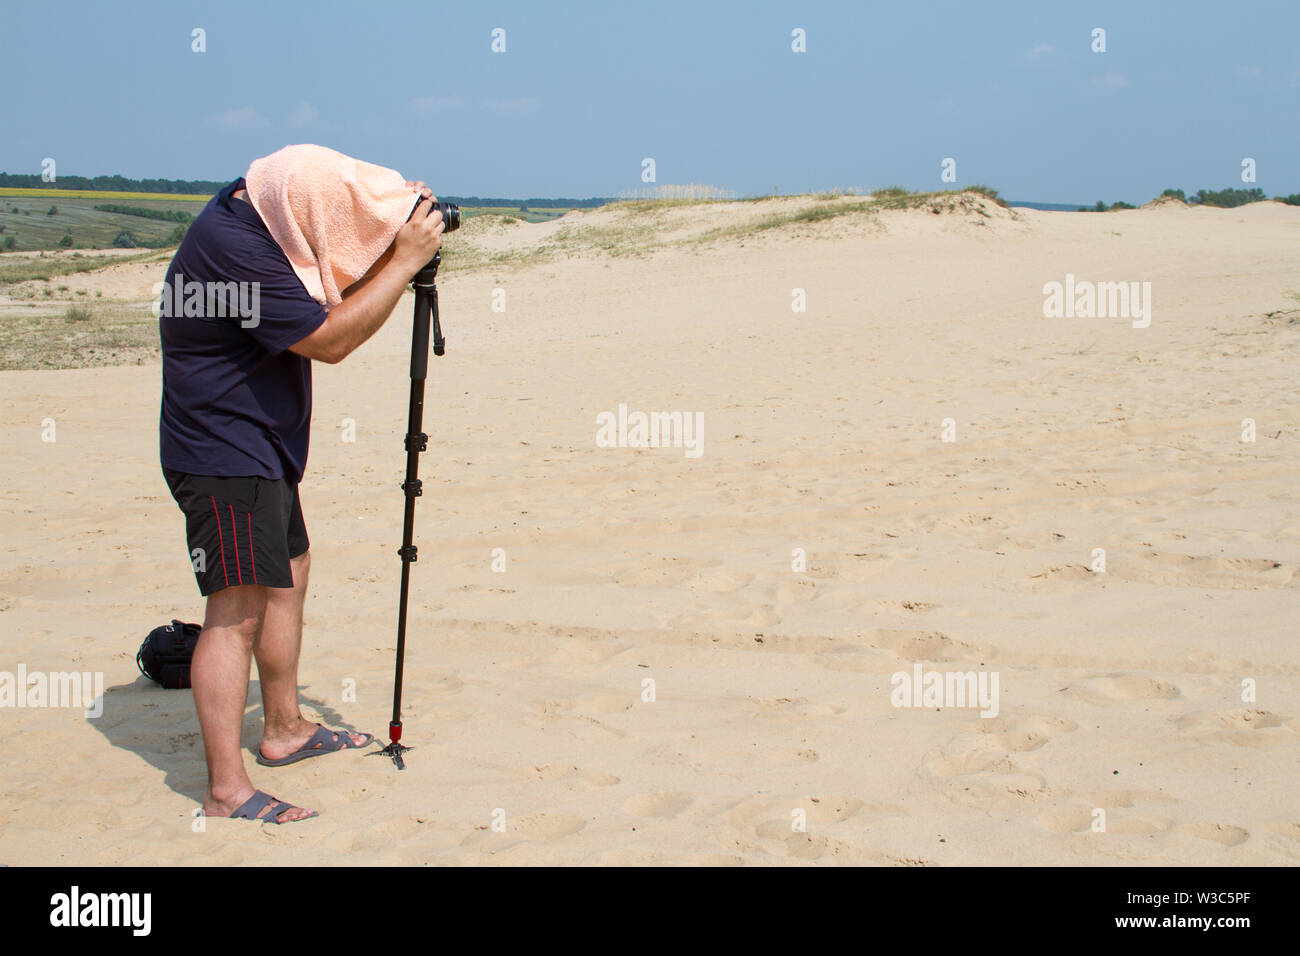 Kharkiv, Ukraine - July 31, 2016: Adult male photographer with a towel on his head from the heat is taking pictures with a camera on a stand in the de Stock Photo